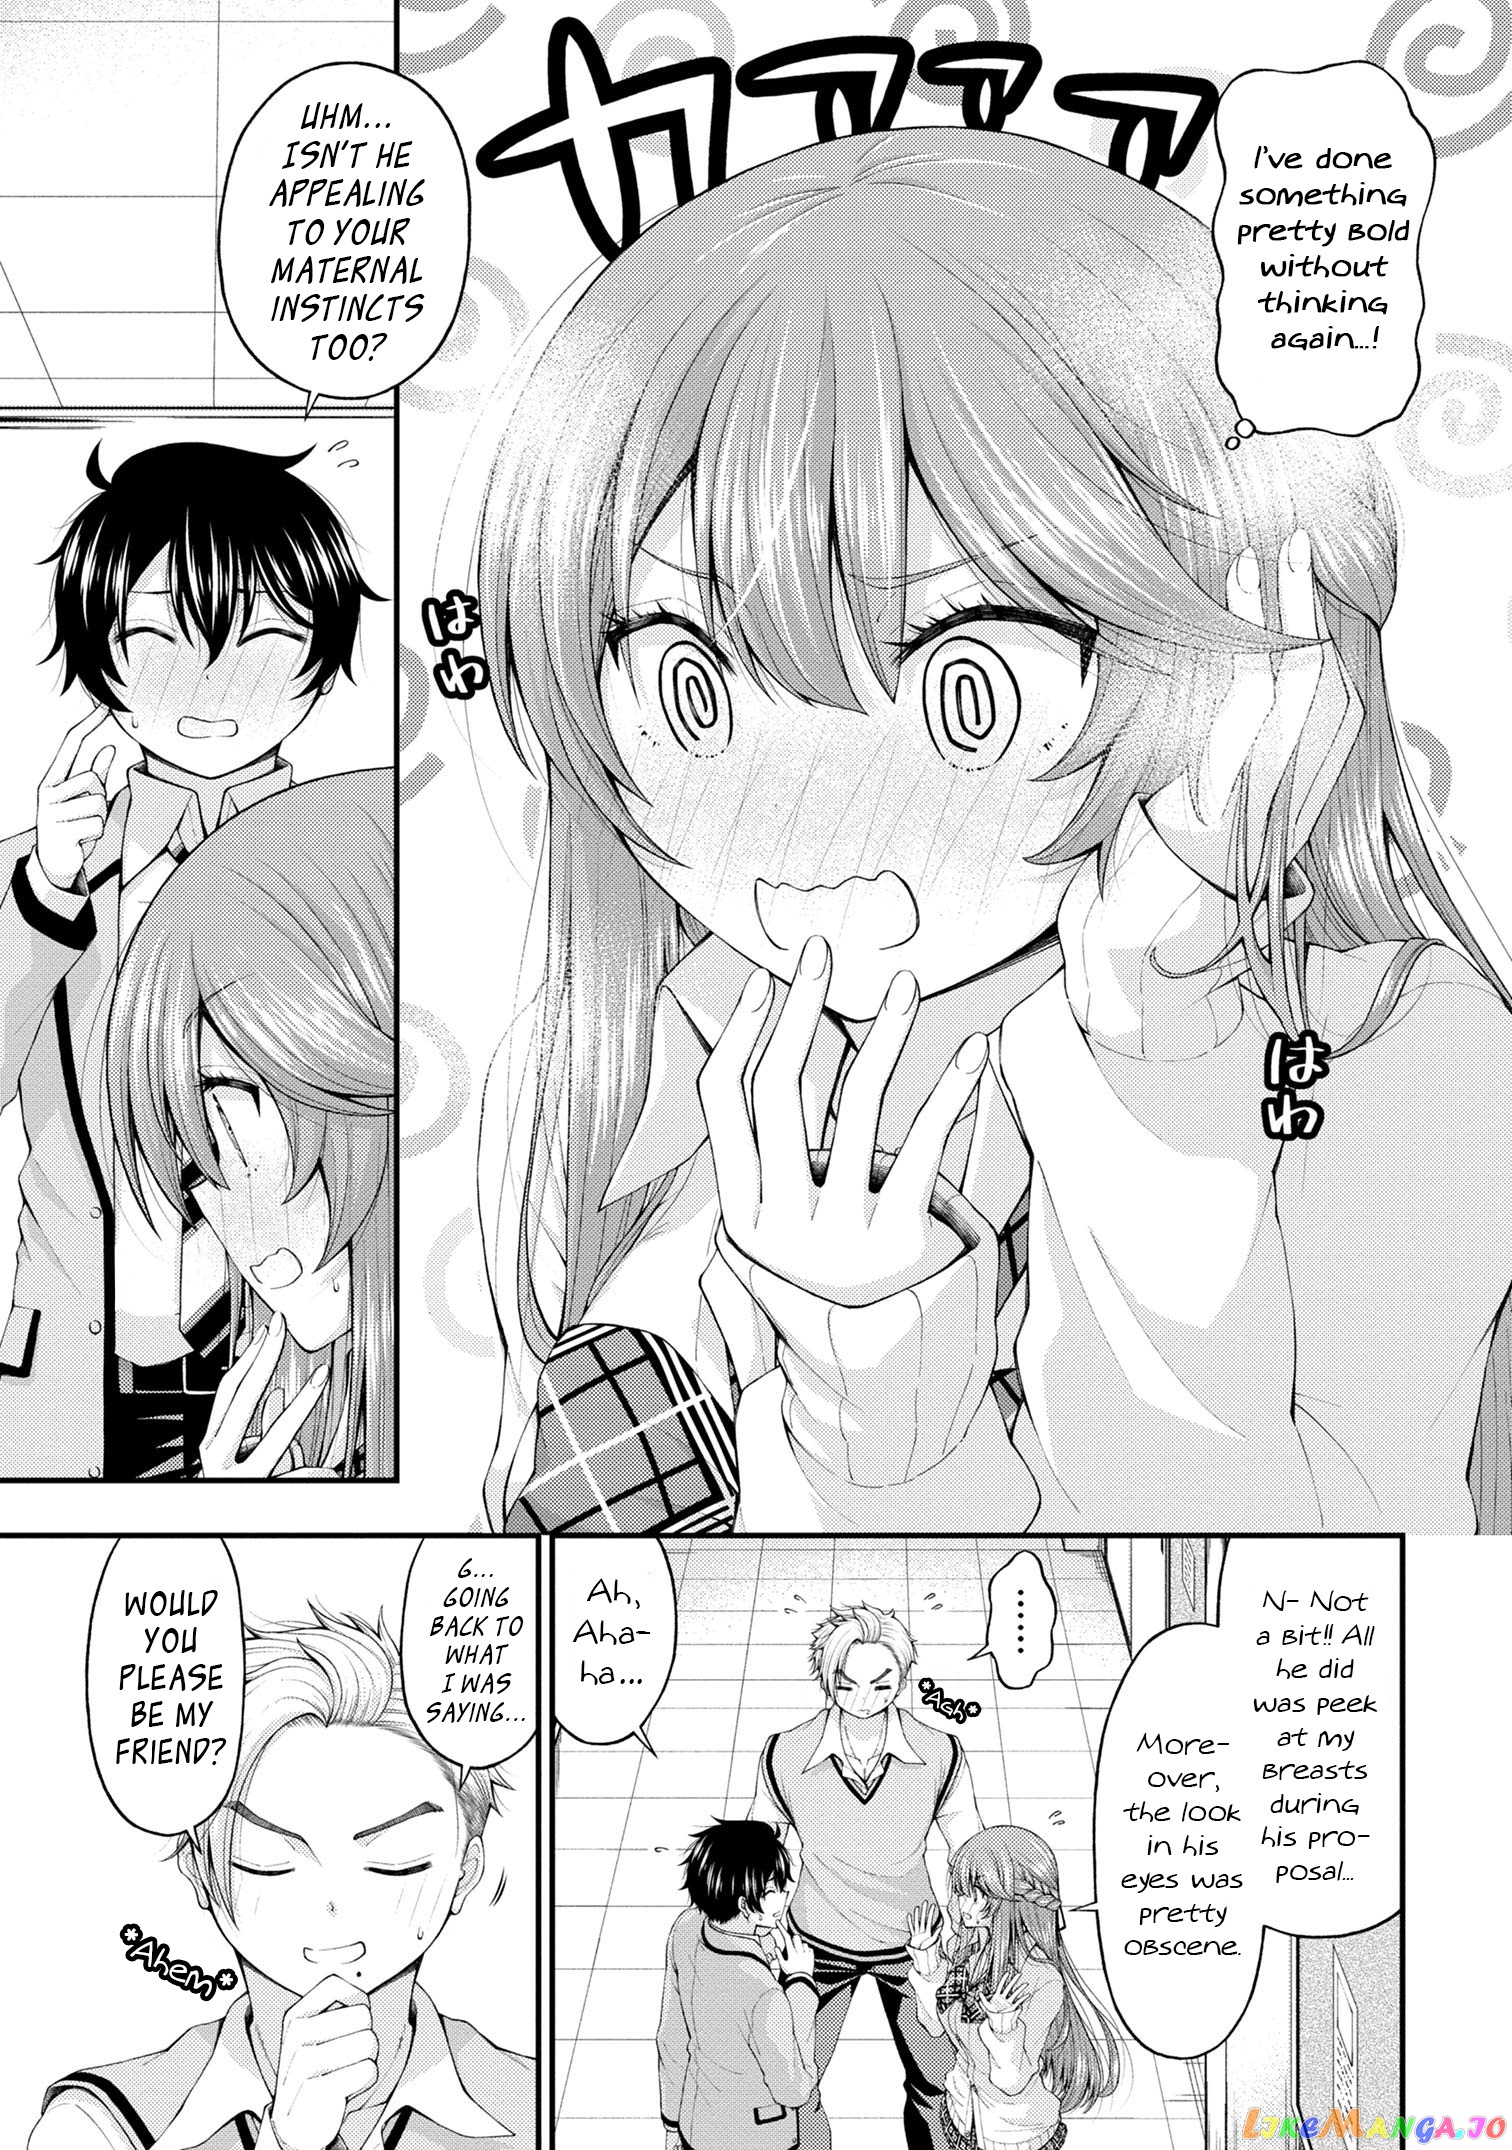 The Gal Who Was Meant to Confess to Me as a Game Punishment Has Apparently Fallen in Love with Me chapter 7.5 - page 15